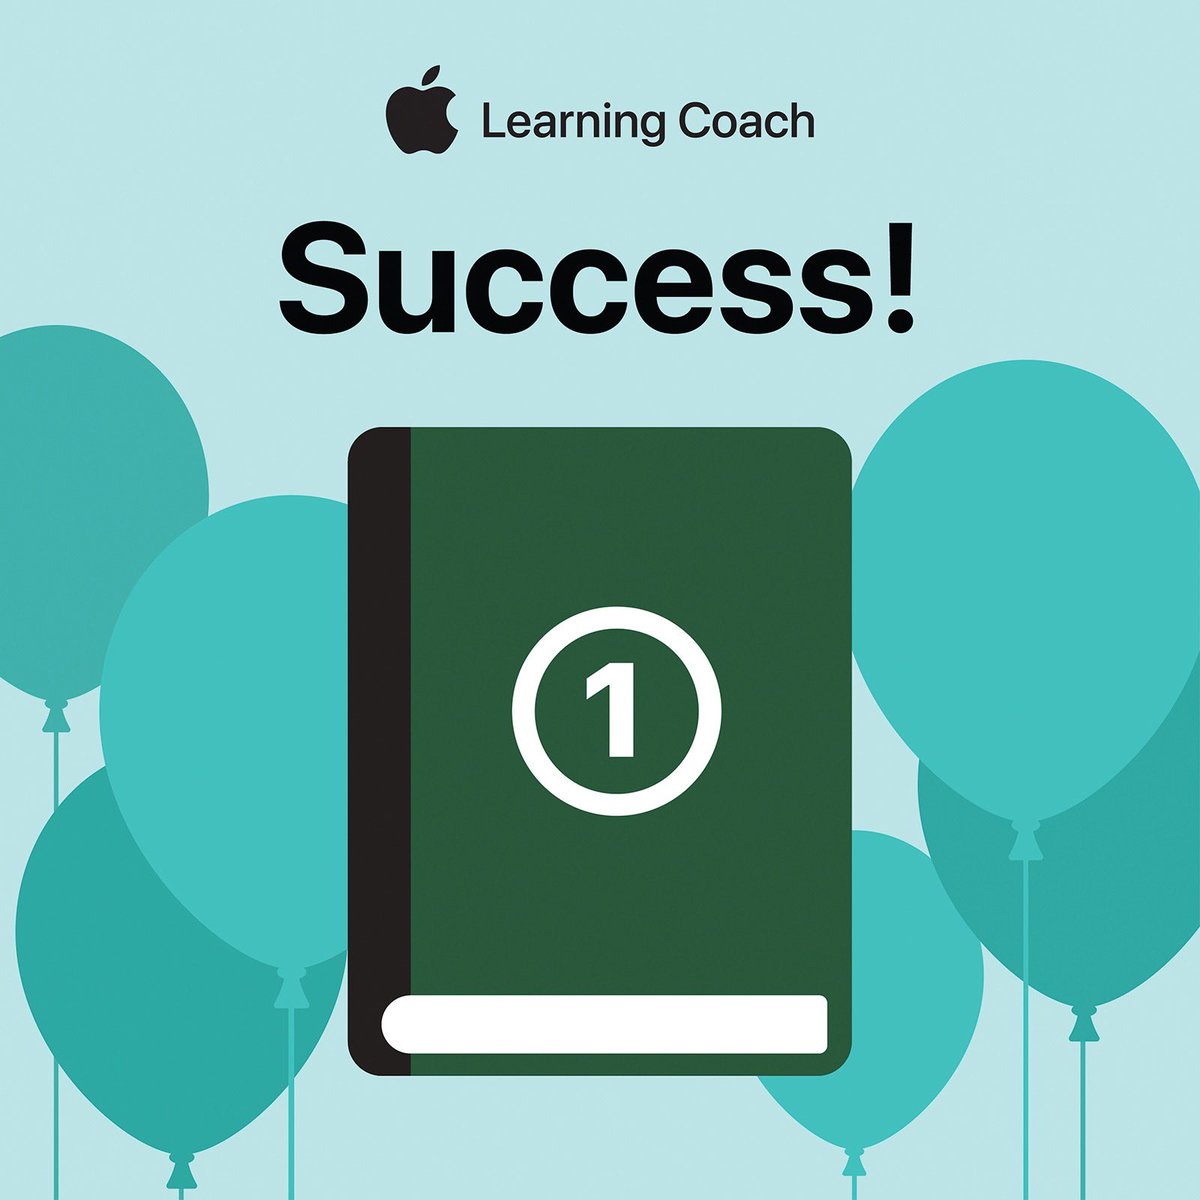 Submitted Unit 1🍎 @AppleEDU #AppleLearningCoach